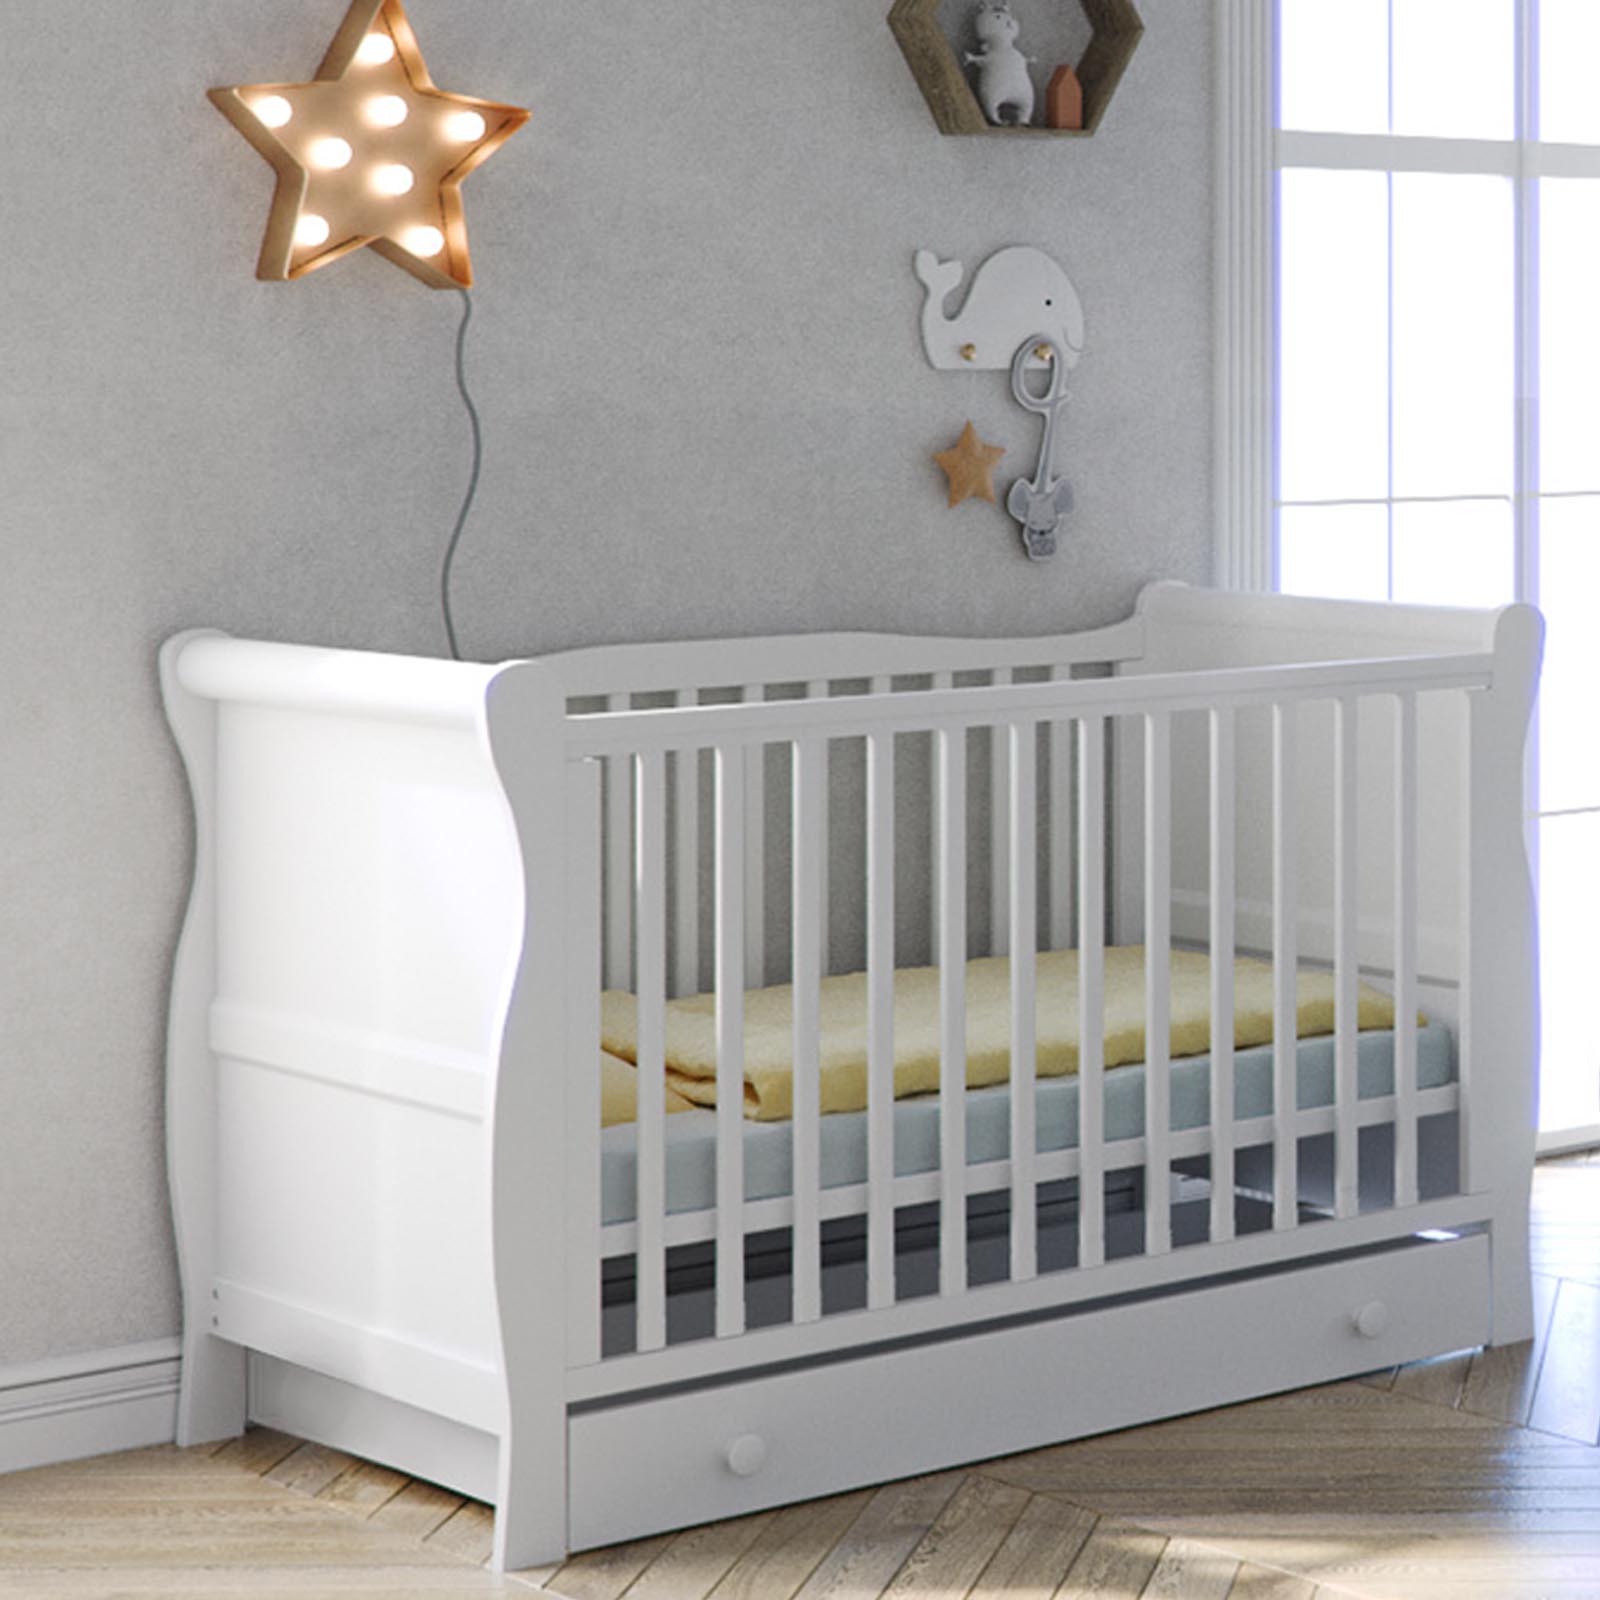 Little Acorns Sleigh Cot Bed With Drawer - White